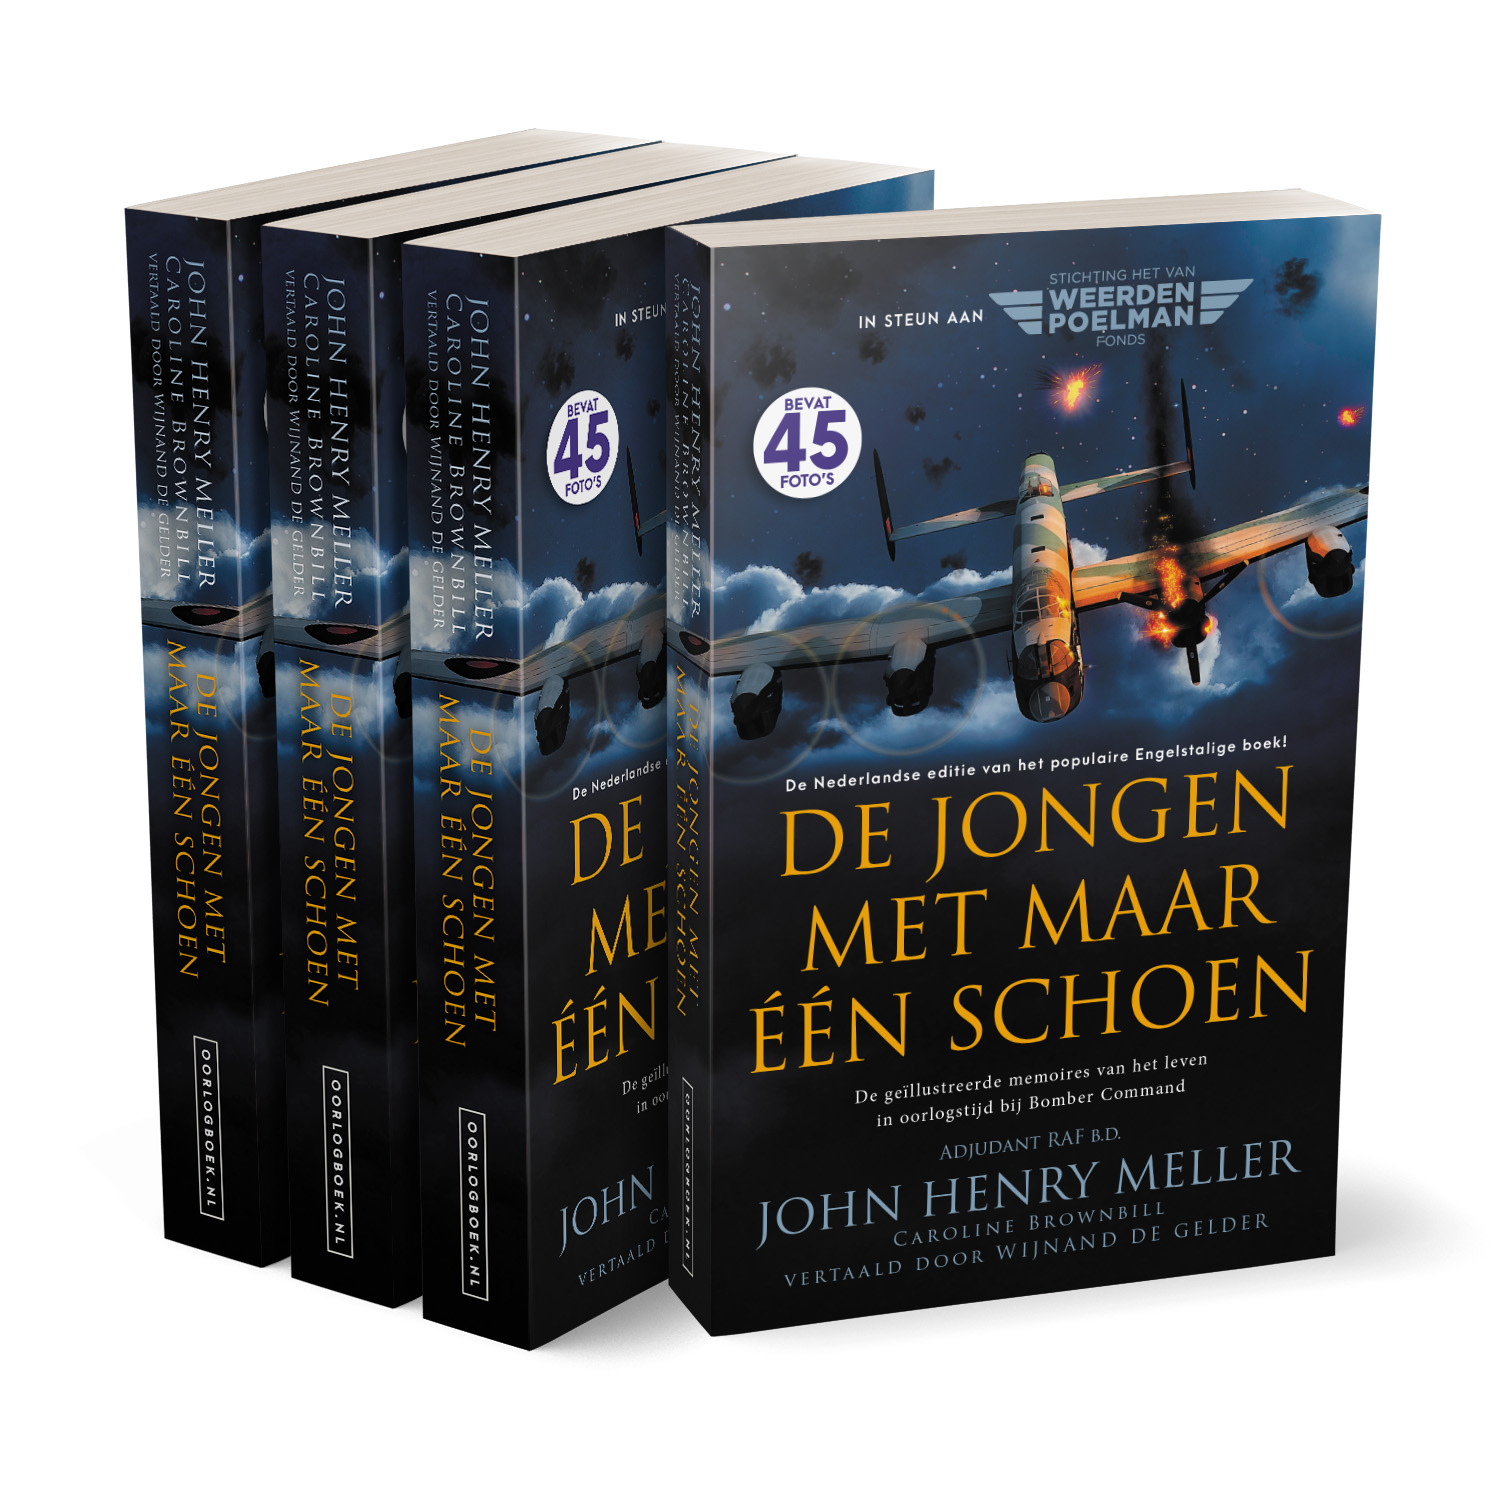 'De Jongen Met Maar Één Schoen' is the Dutch-translated version of a vivid and affecting memoir of life in RAF Bomber Command during WW2. The authors are John Henry Meller and Caroline Brownbill. The translator is Wijnand De Gelder. The book cover design and interior formatting are by Mark Thomas. To learn more about what Mark could do for your book, please visit coverness.com.